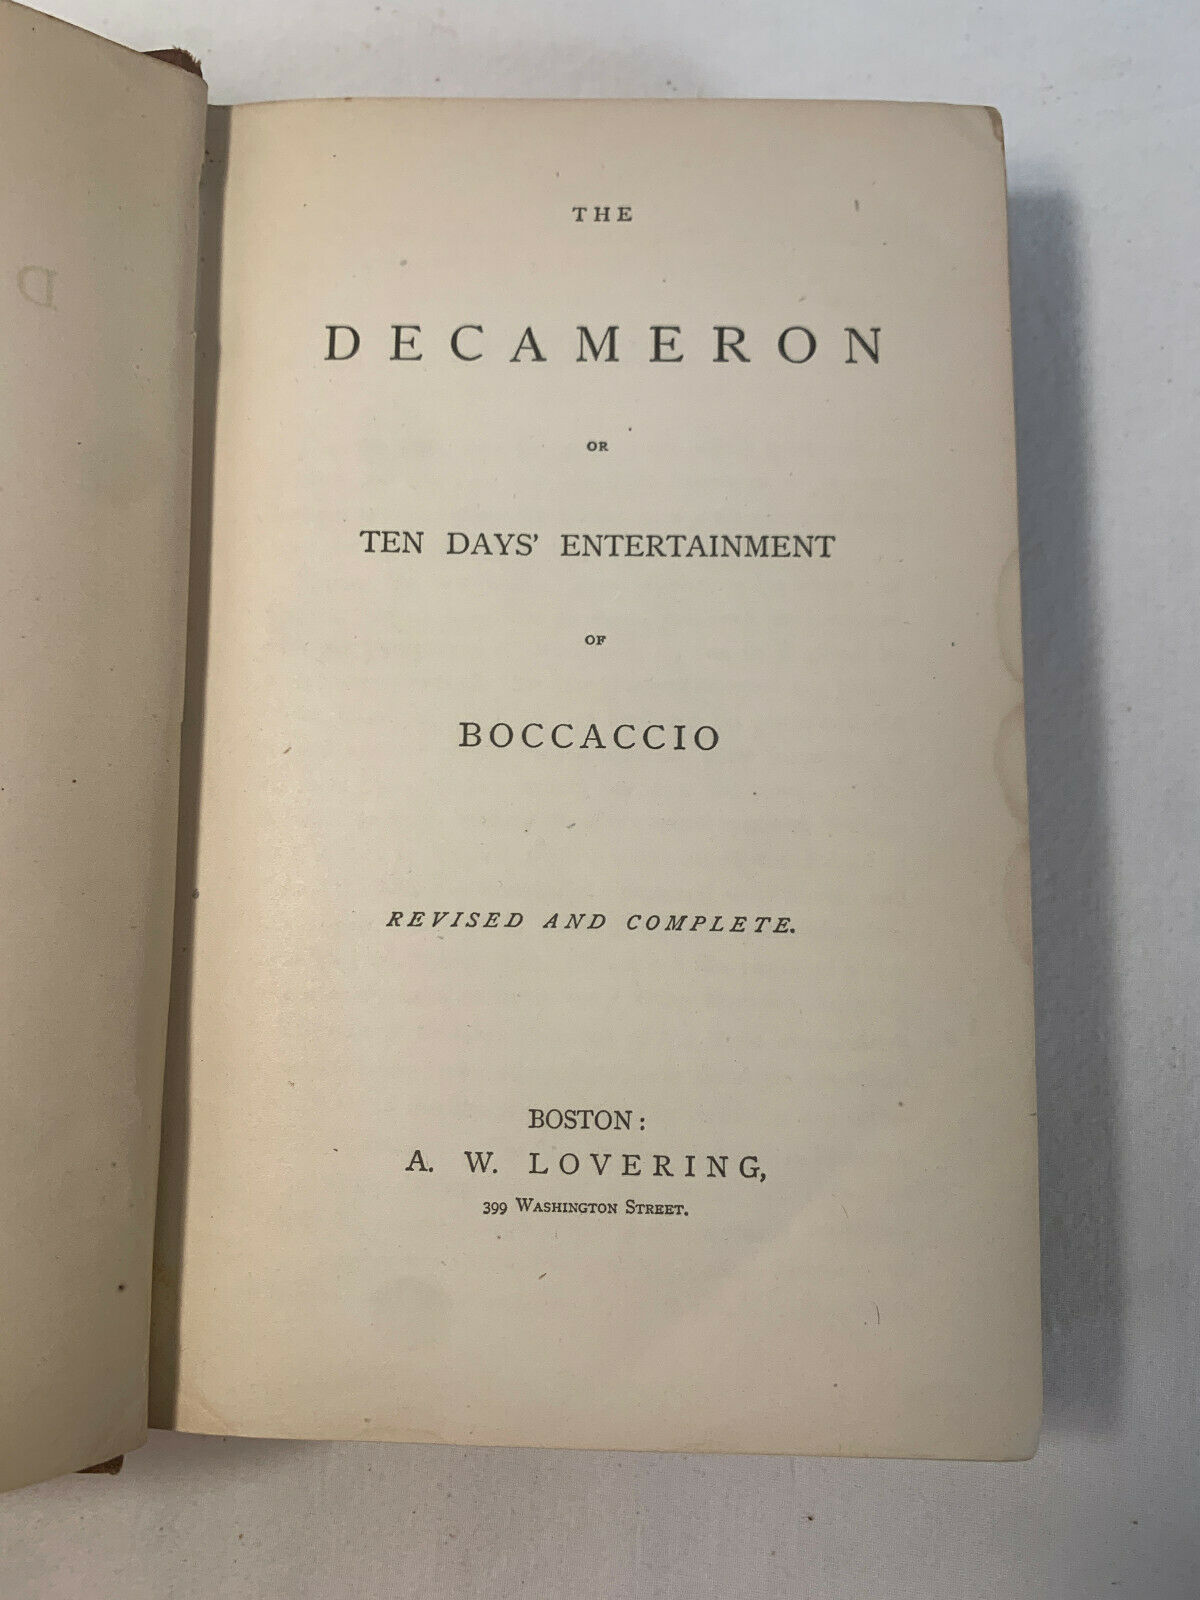 the decameron or ten days entertainment of boccaccio, Published by A.V Lovering